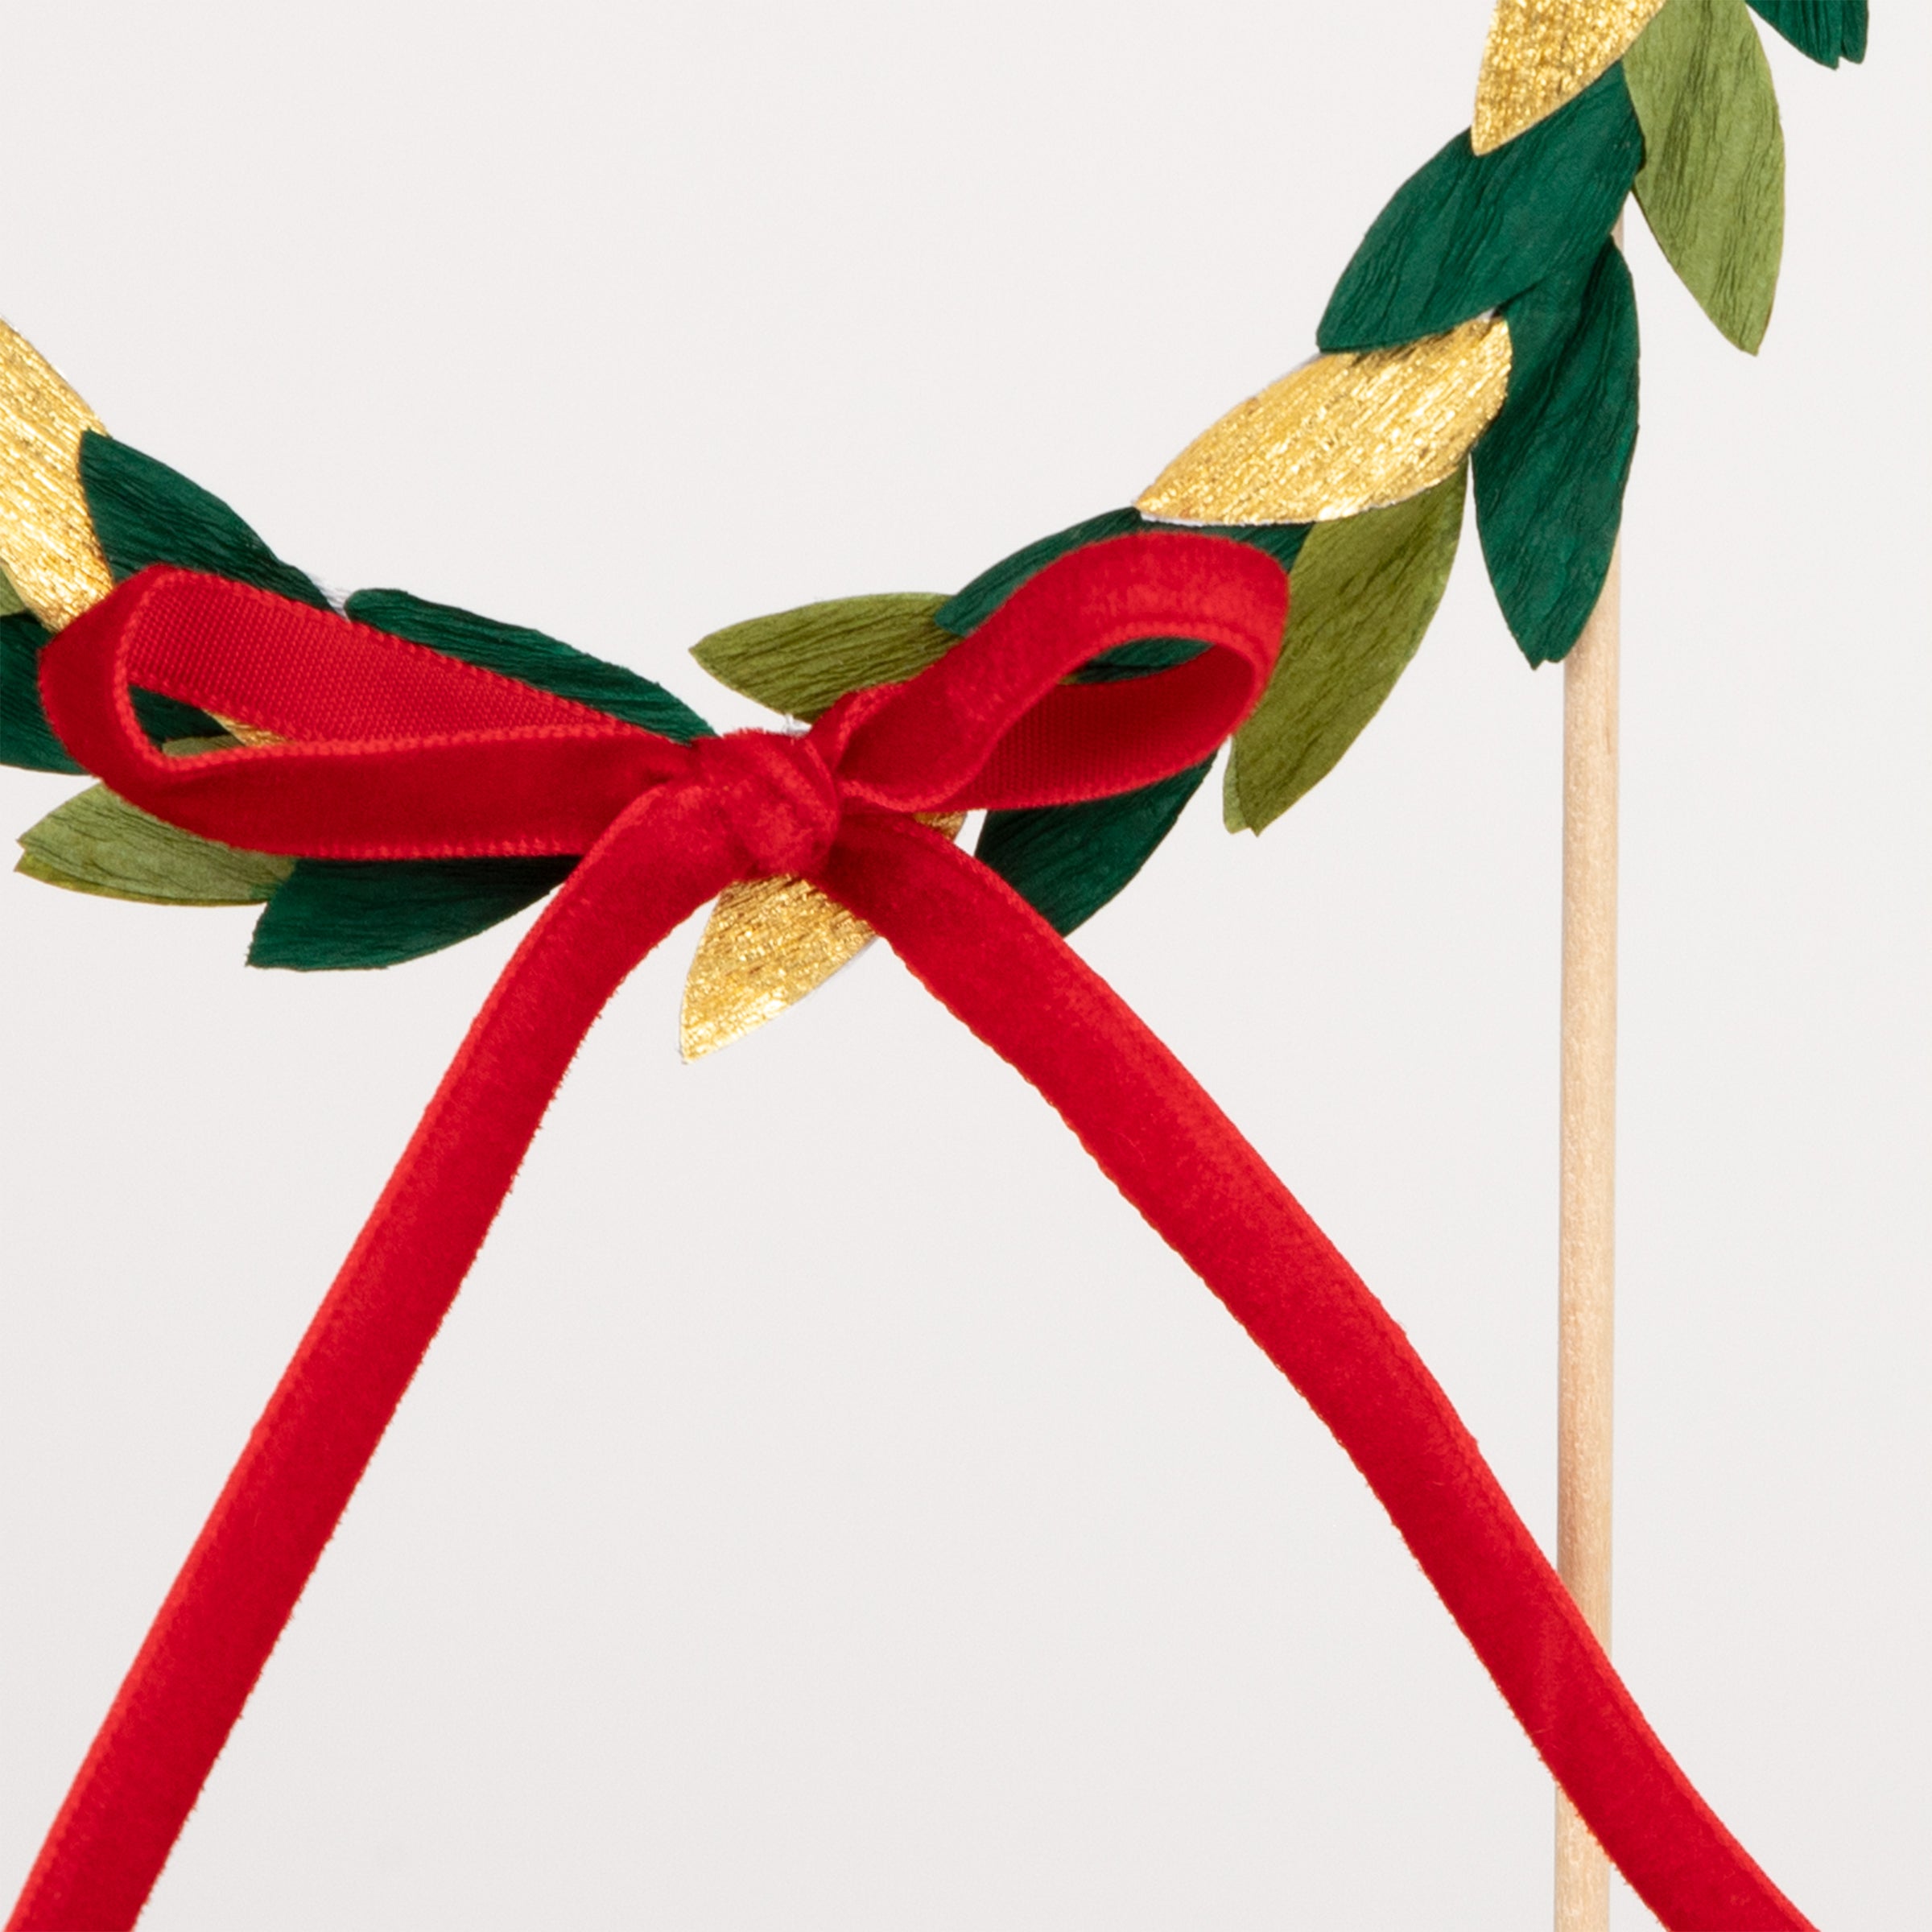 Our Christmas cake topper, a festive wreath with paper leaves and a velvet bow, is the perfect Christmas cake decoration.